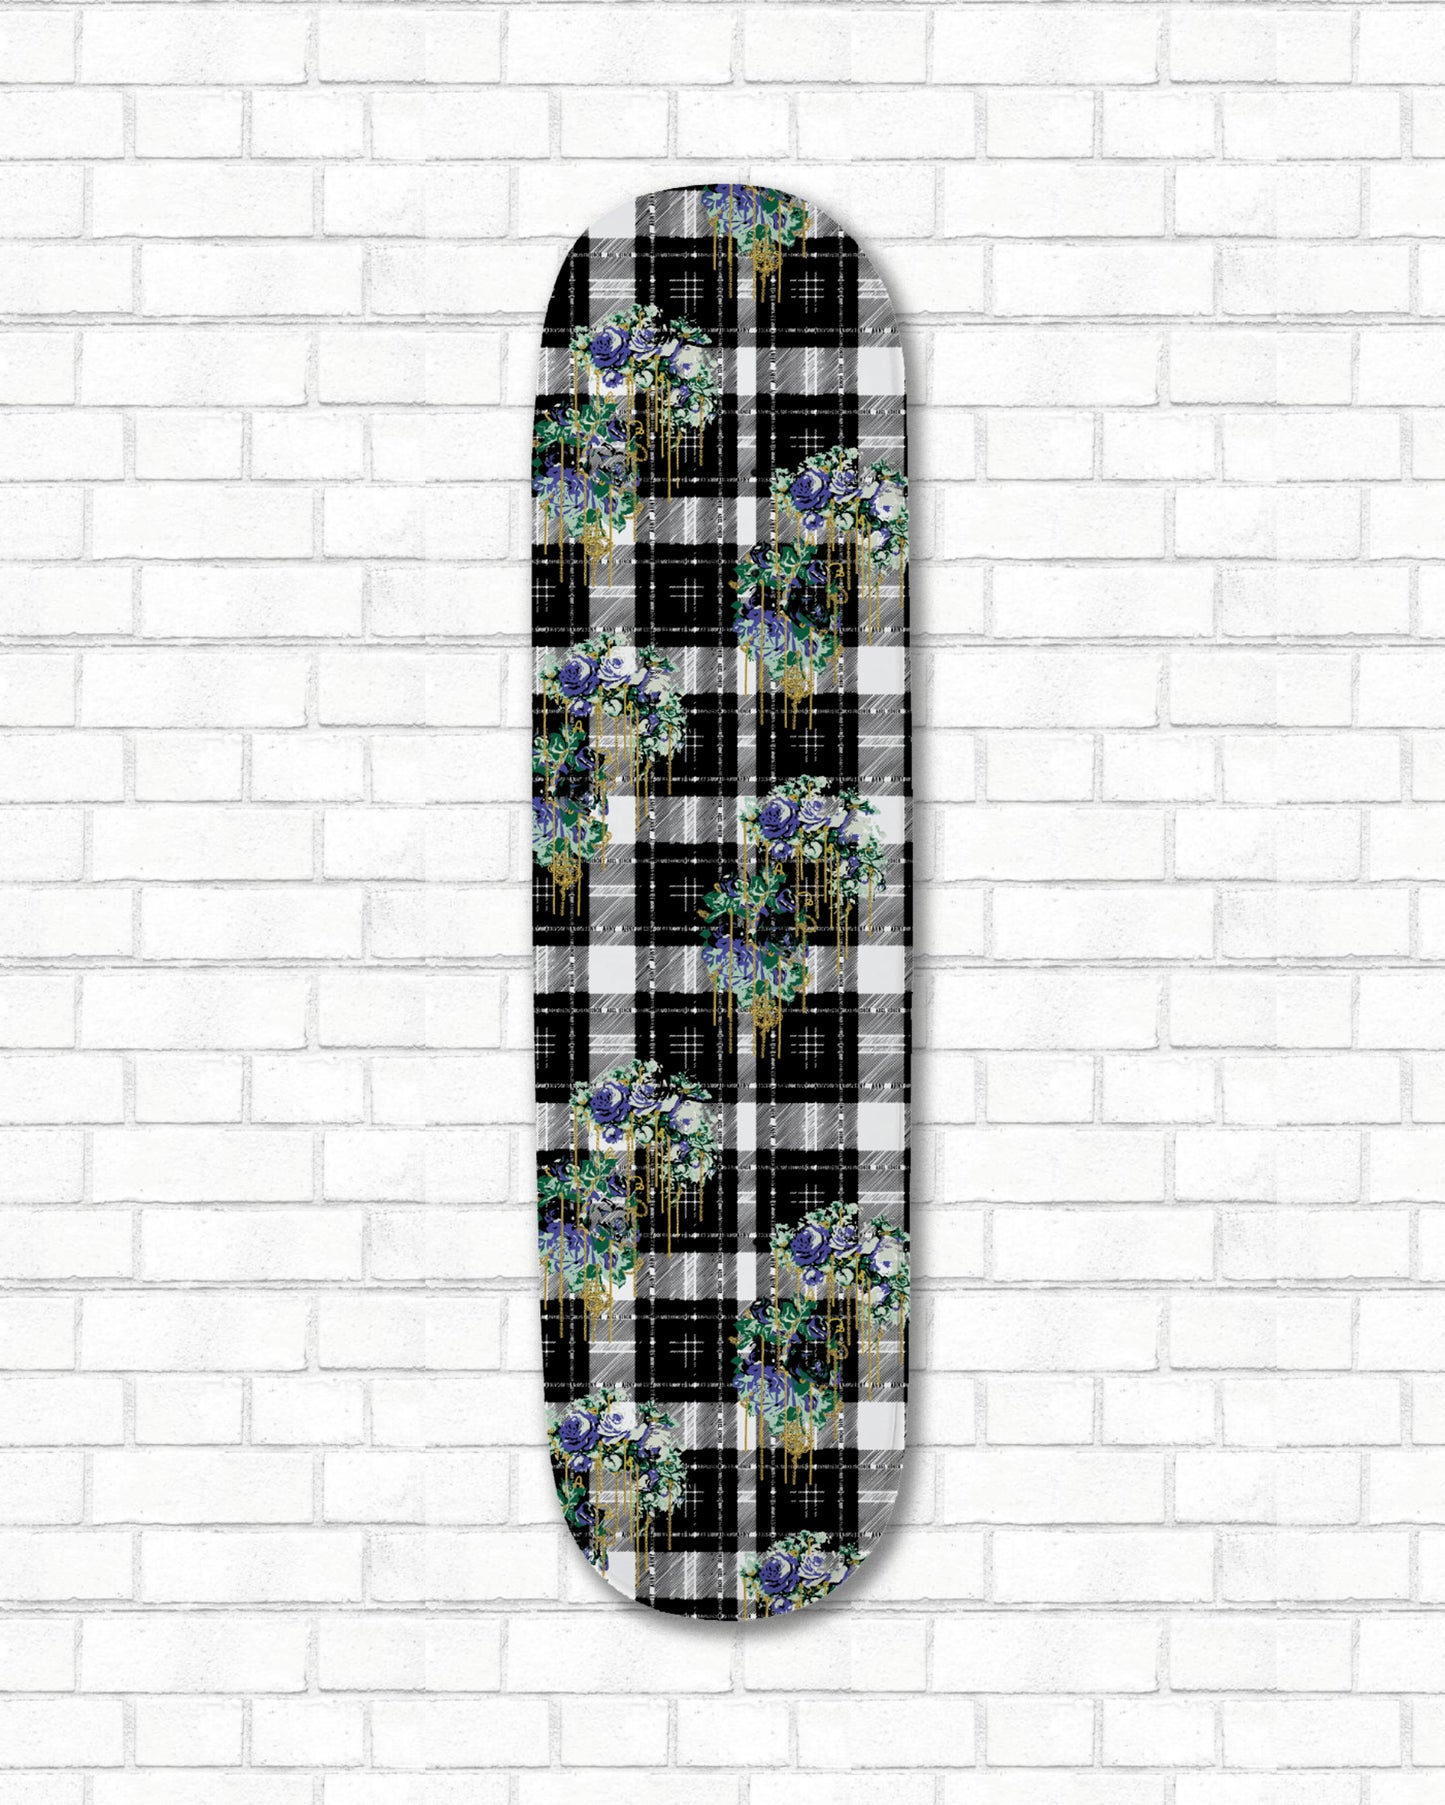 WALL MOUNTED AHNY SK8 DECK